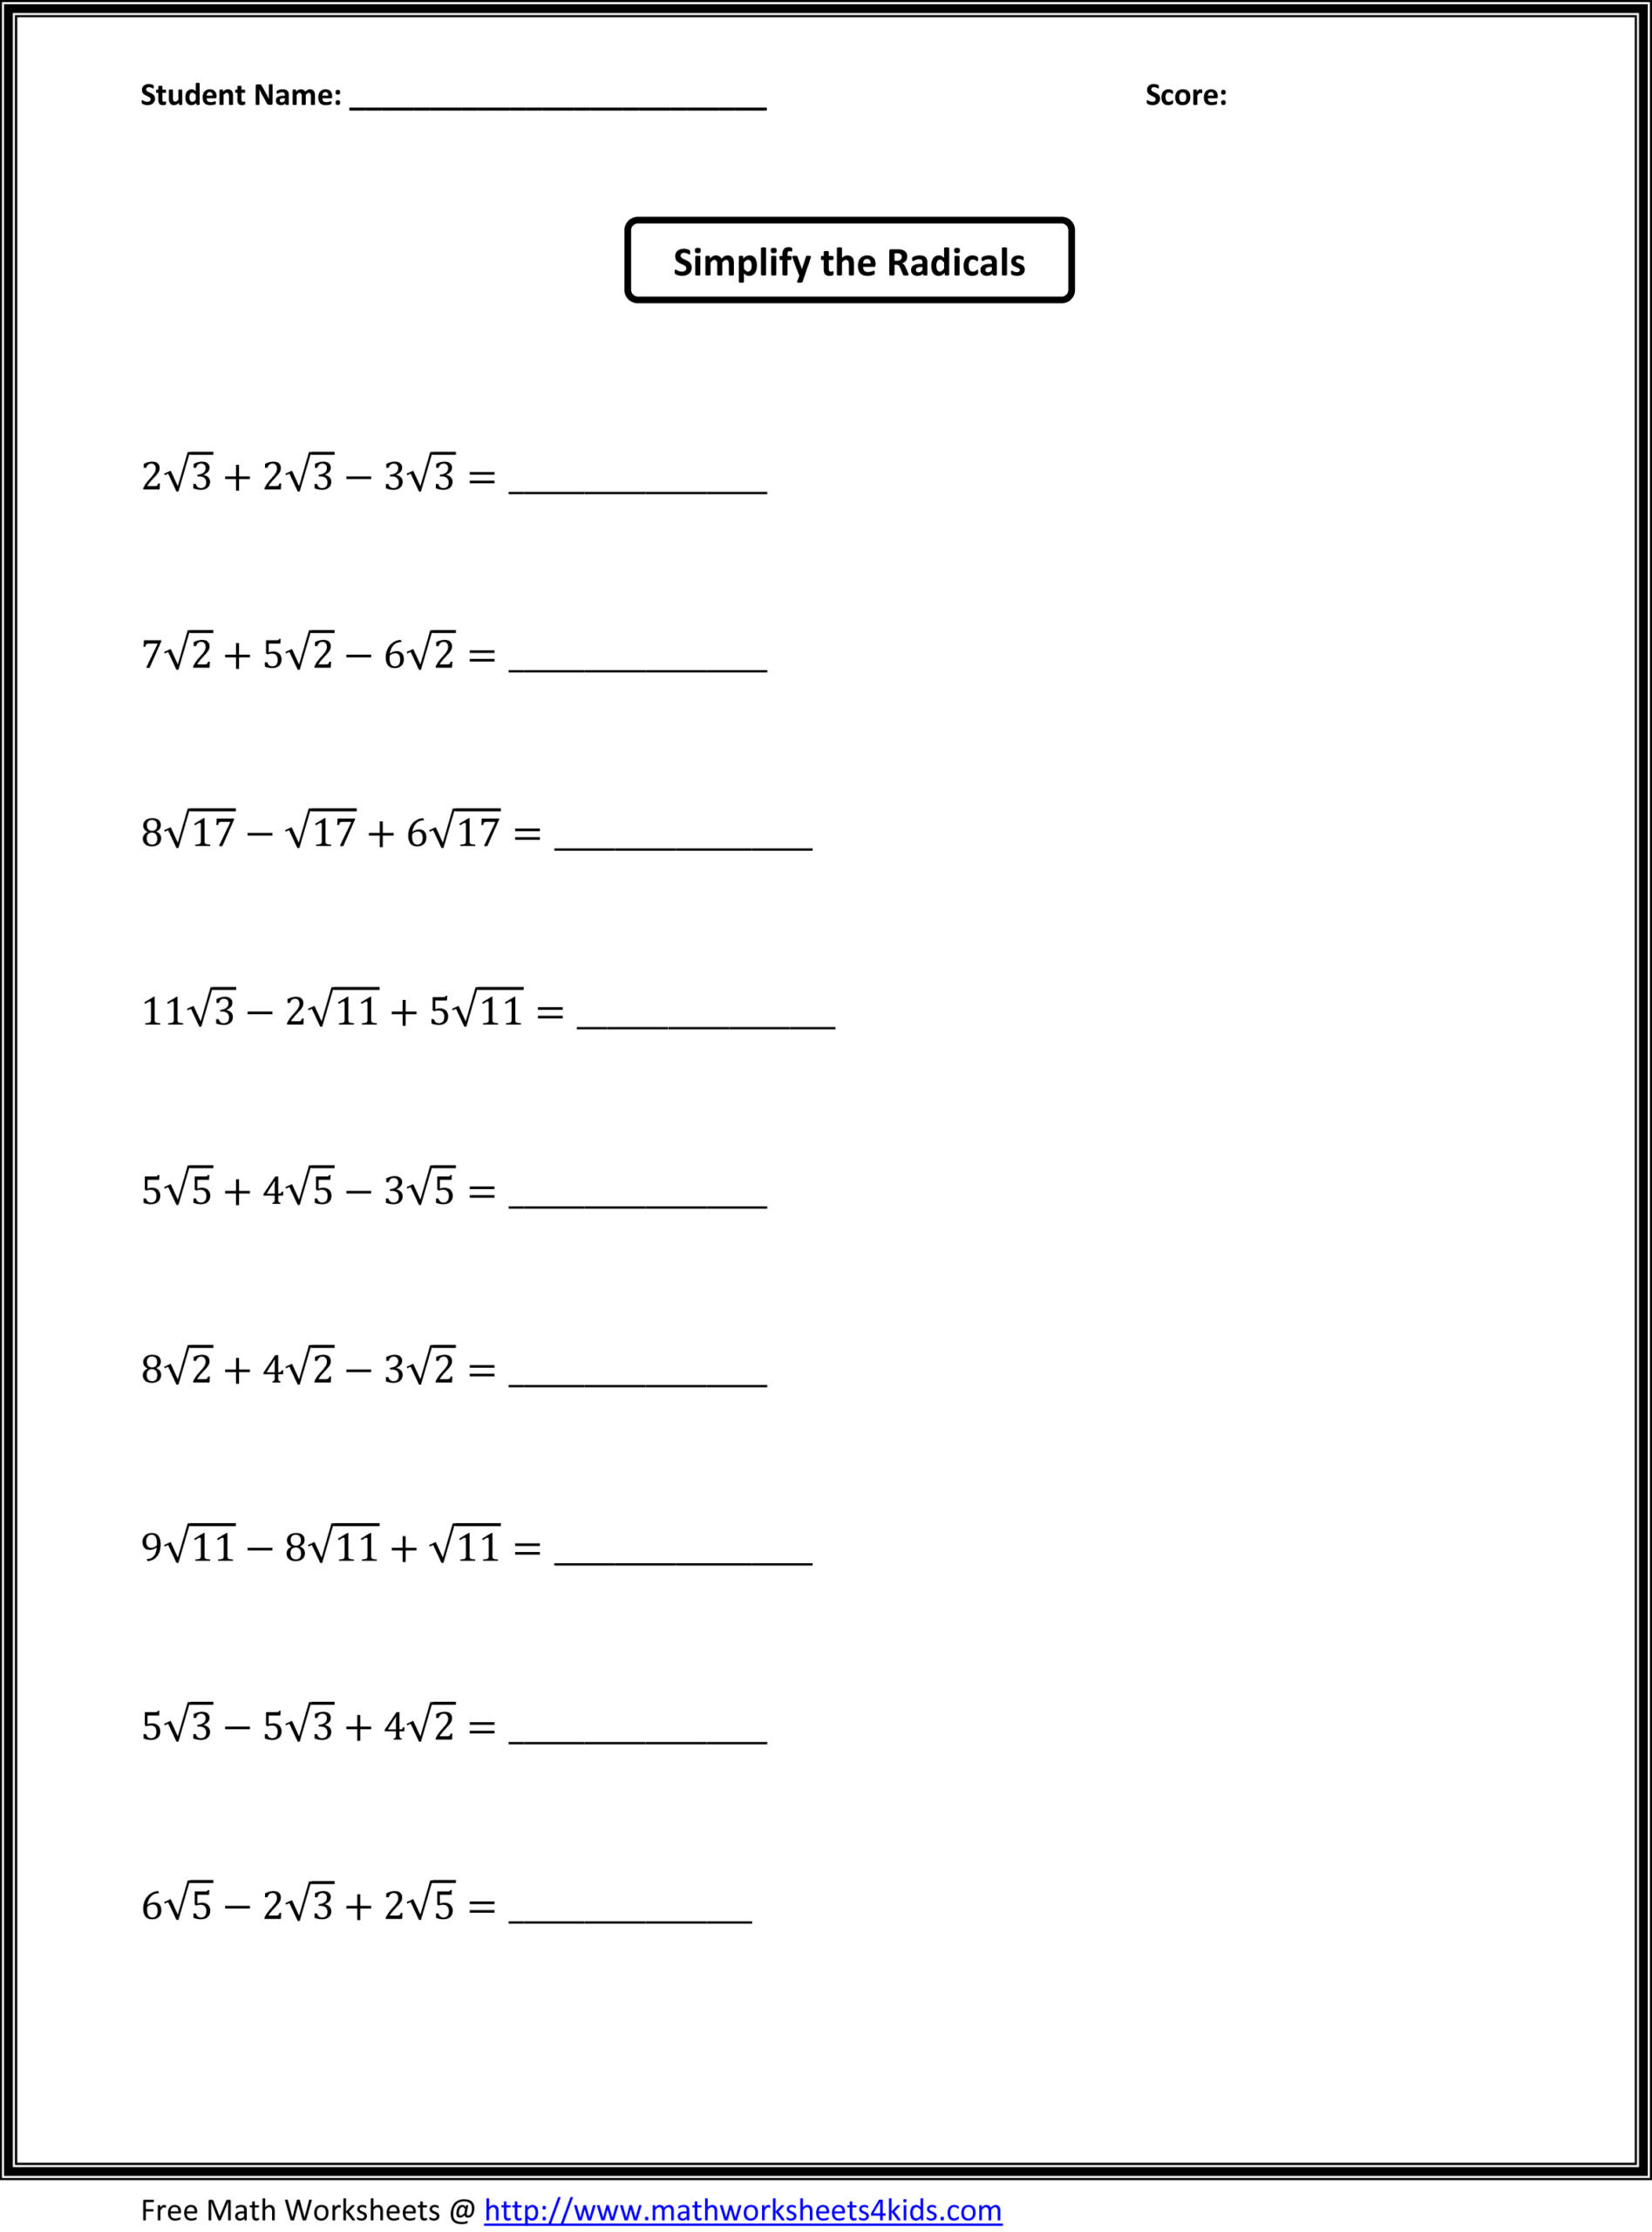 Adding and Subtracting Radicals Worksheet Worksheets for Grade Printable and Activities Getting Ready